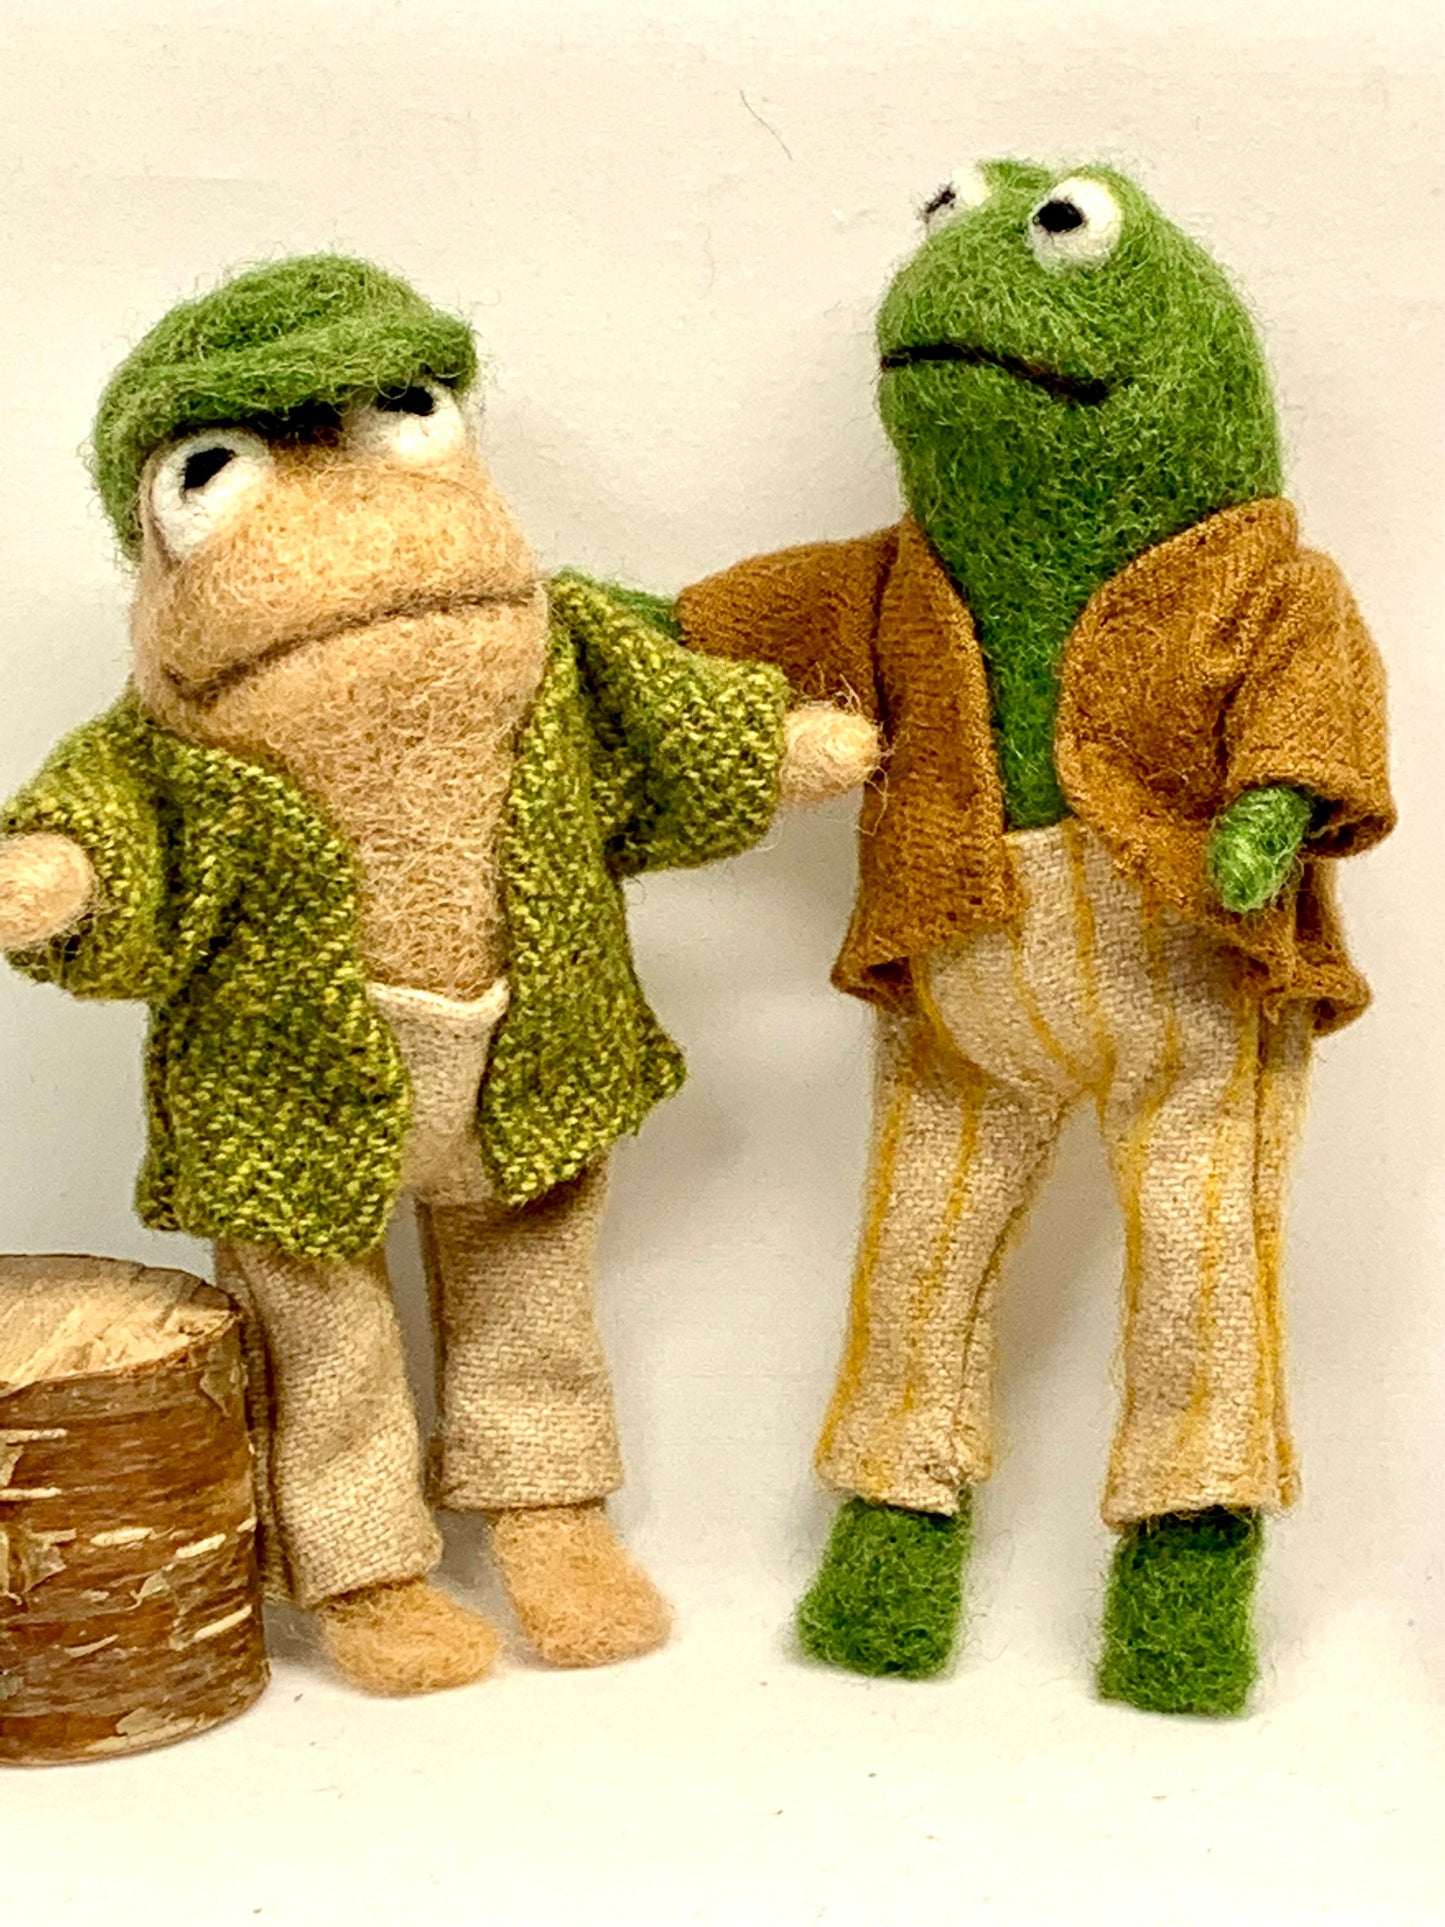 Frog and Toad Sculptures